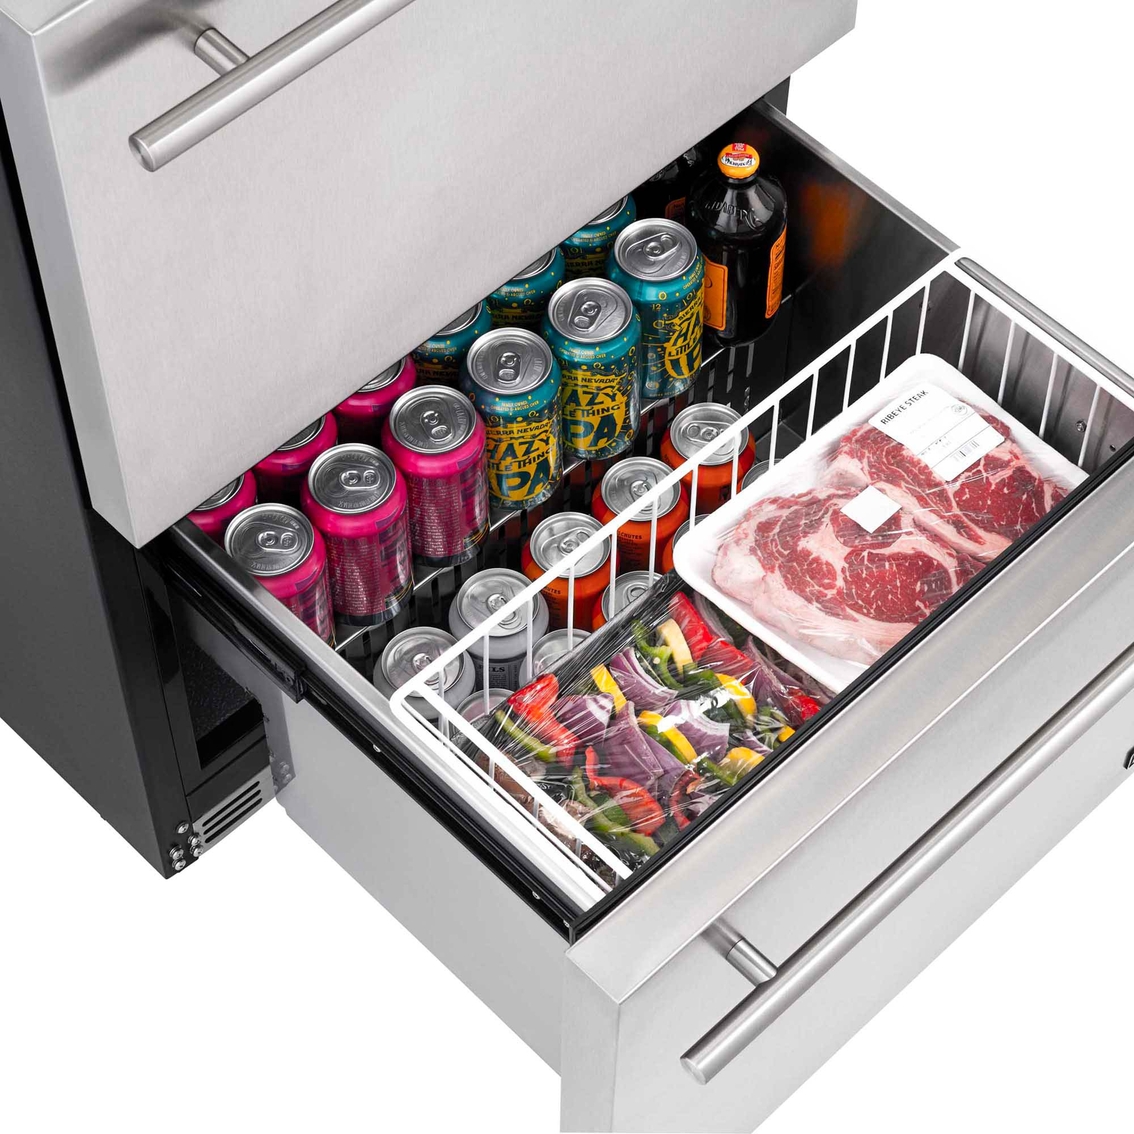 NewAir 24 in. Built In Dual Zone 20 Bottle and 70 Can Wine and Beverage Fridge - Image 7 of 10